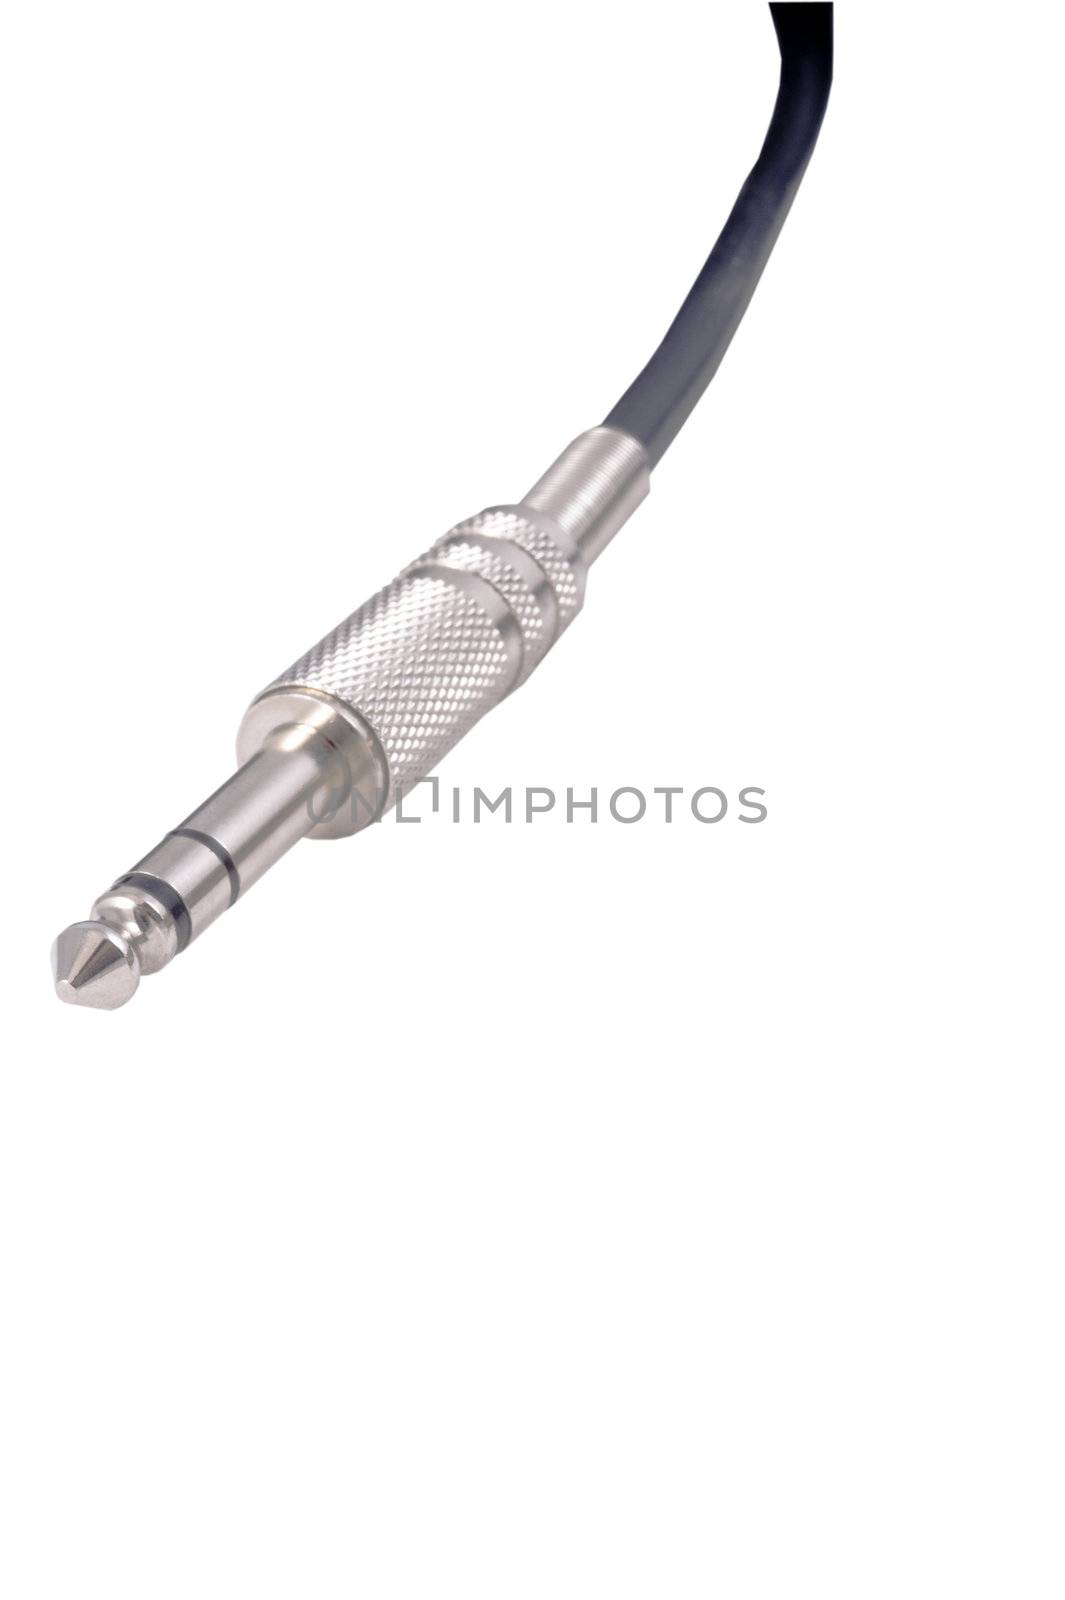 Stereo jack connector on white background isolated
